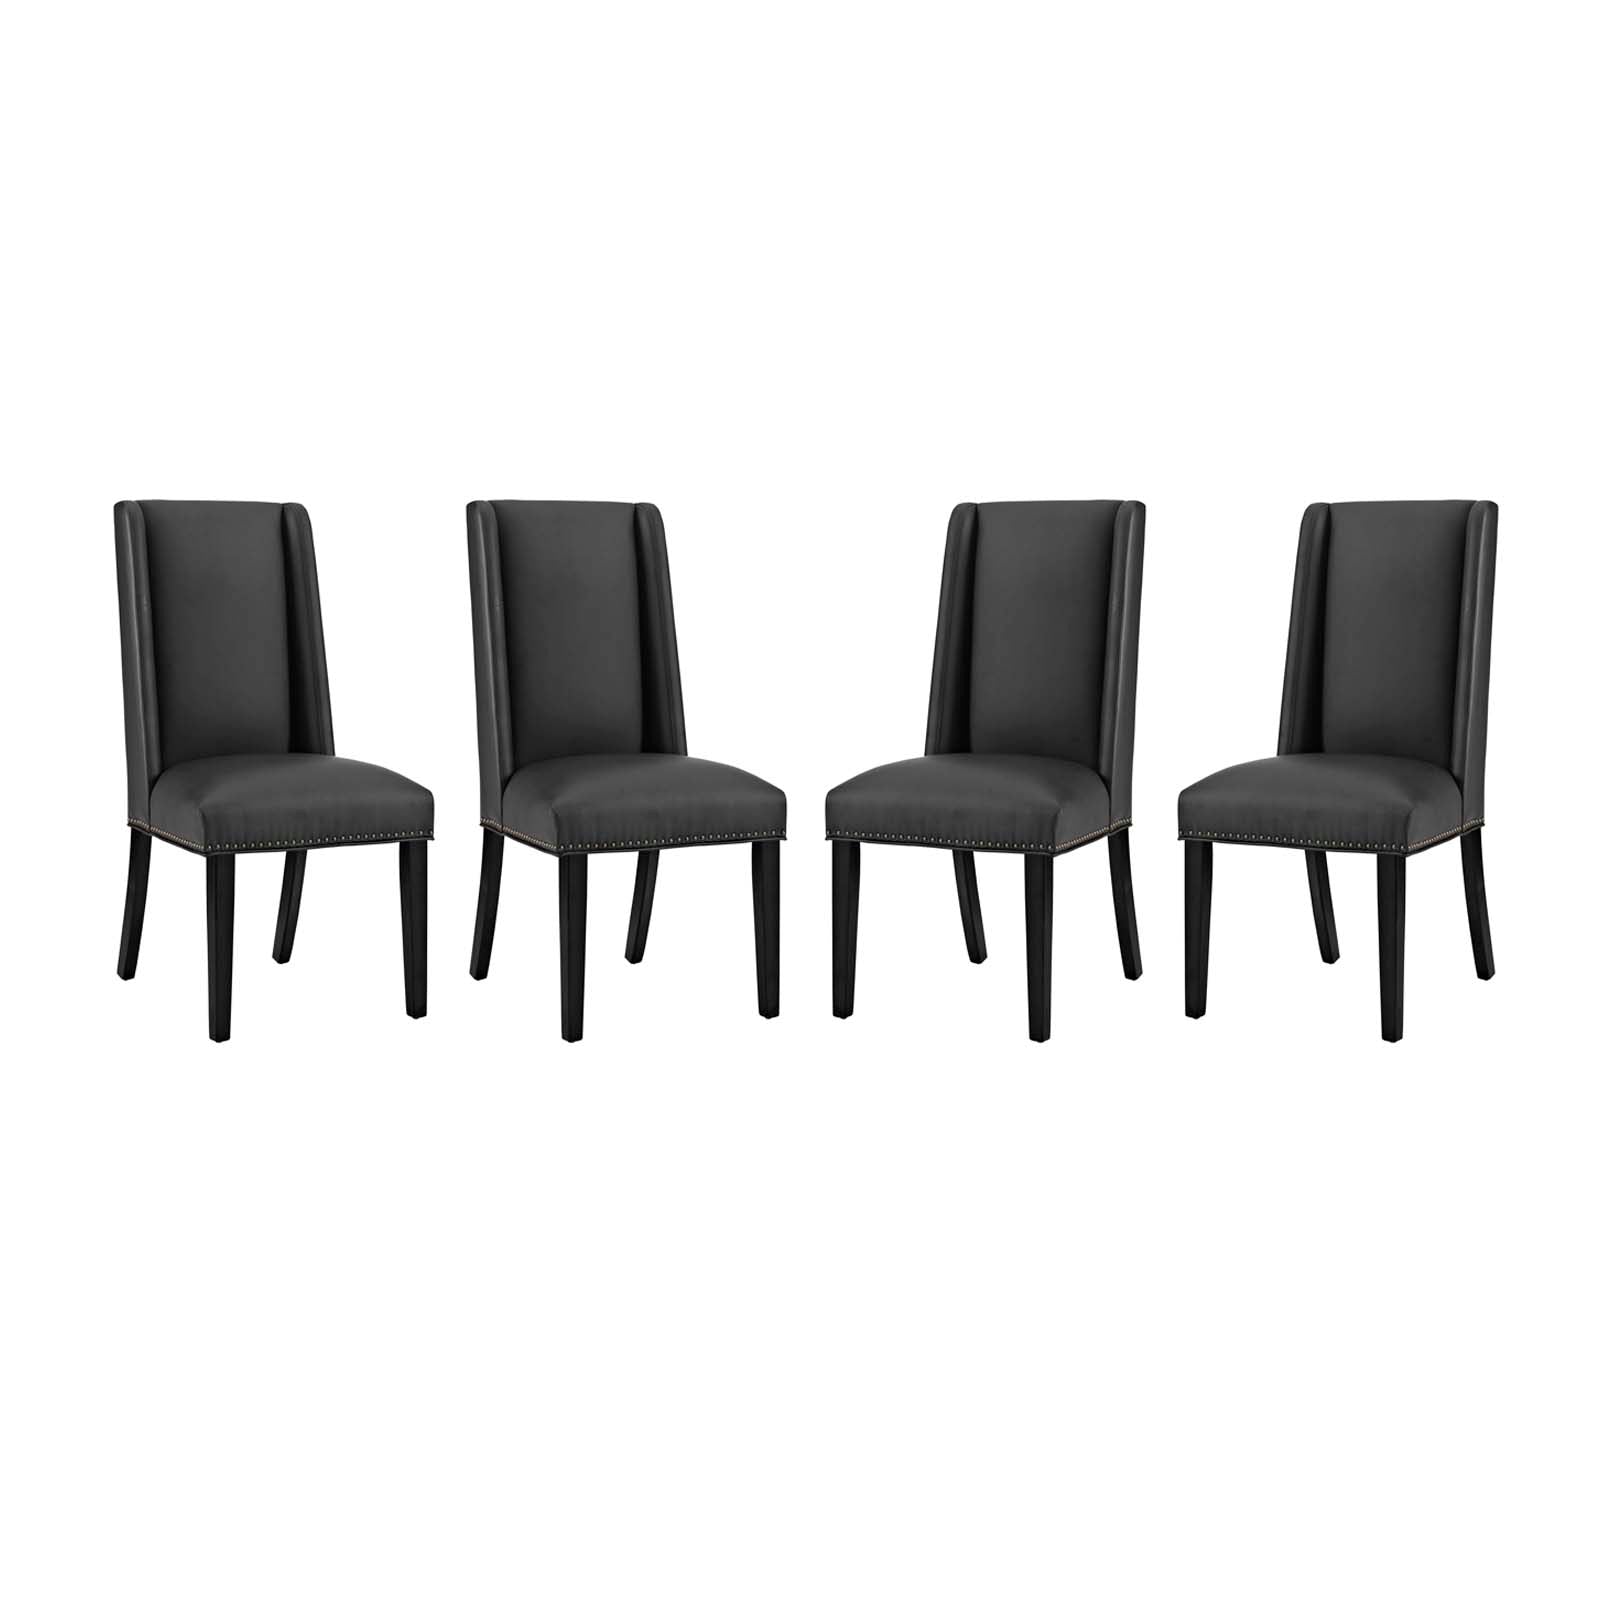 Baron Kitchen And Dining Vinyl Chair Set Of 4 - Dining Room Chair Set